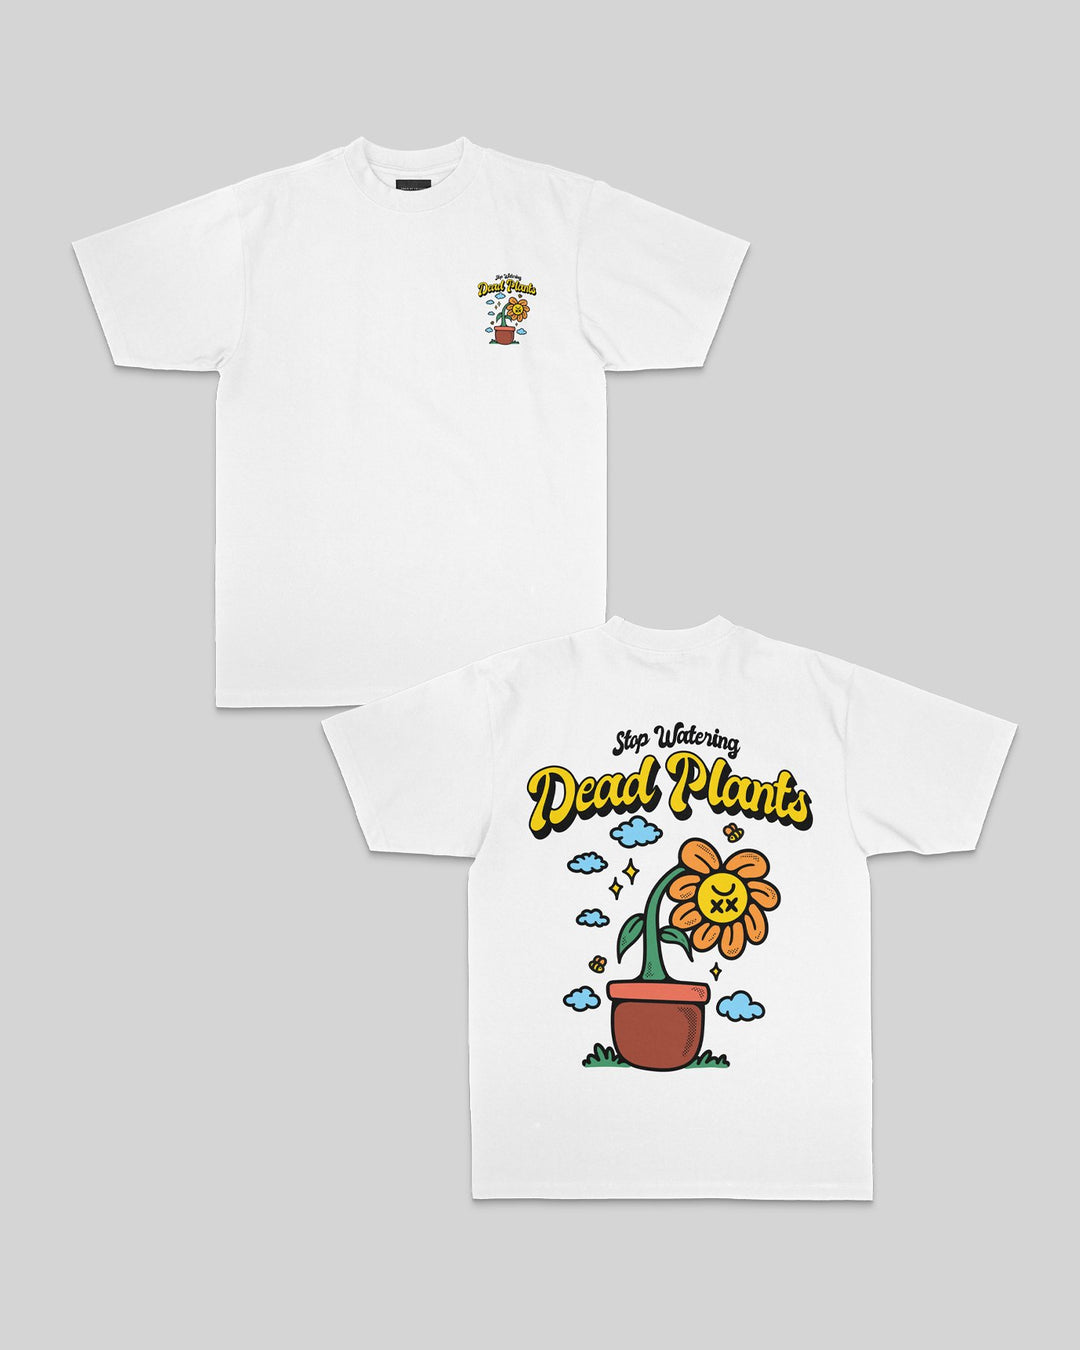 Stop Watering Dead Plants V3 White Tee - trainofthoughtcollective